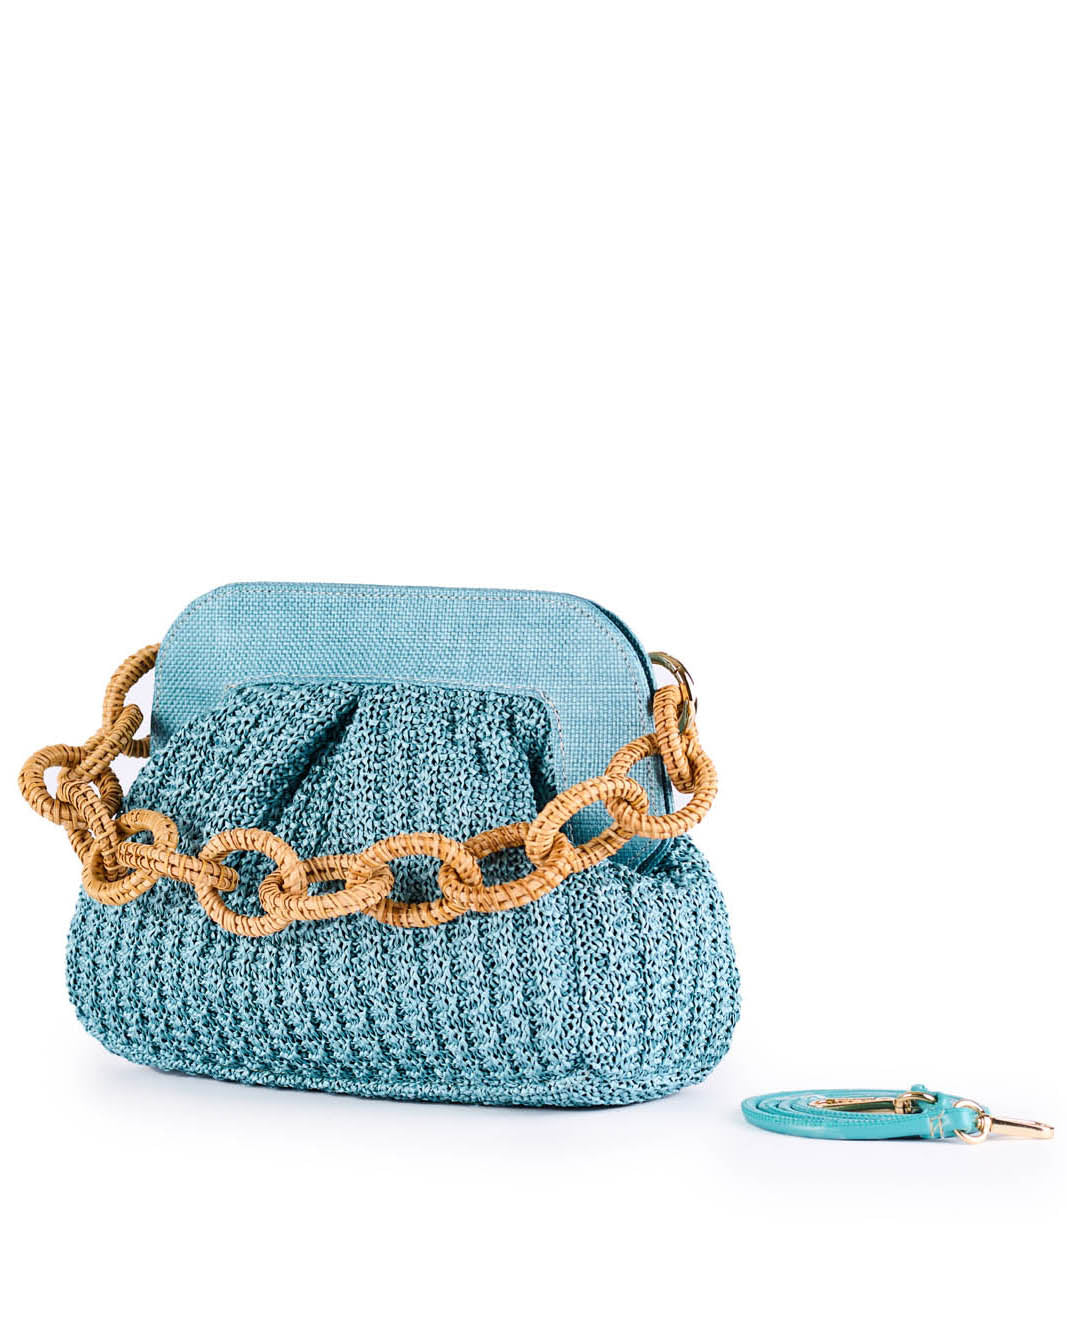 Blue woven handbag with chunky gold chain and matching detachable strap